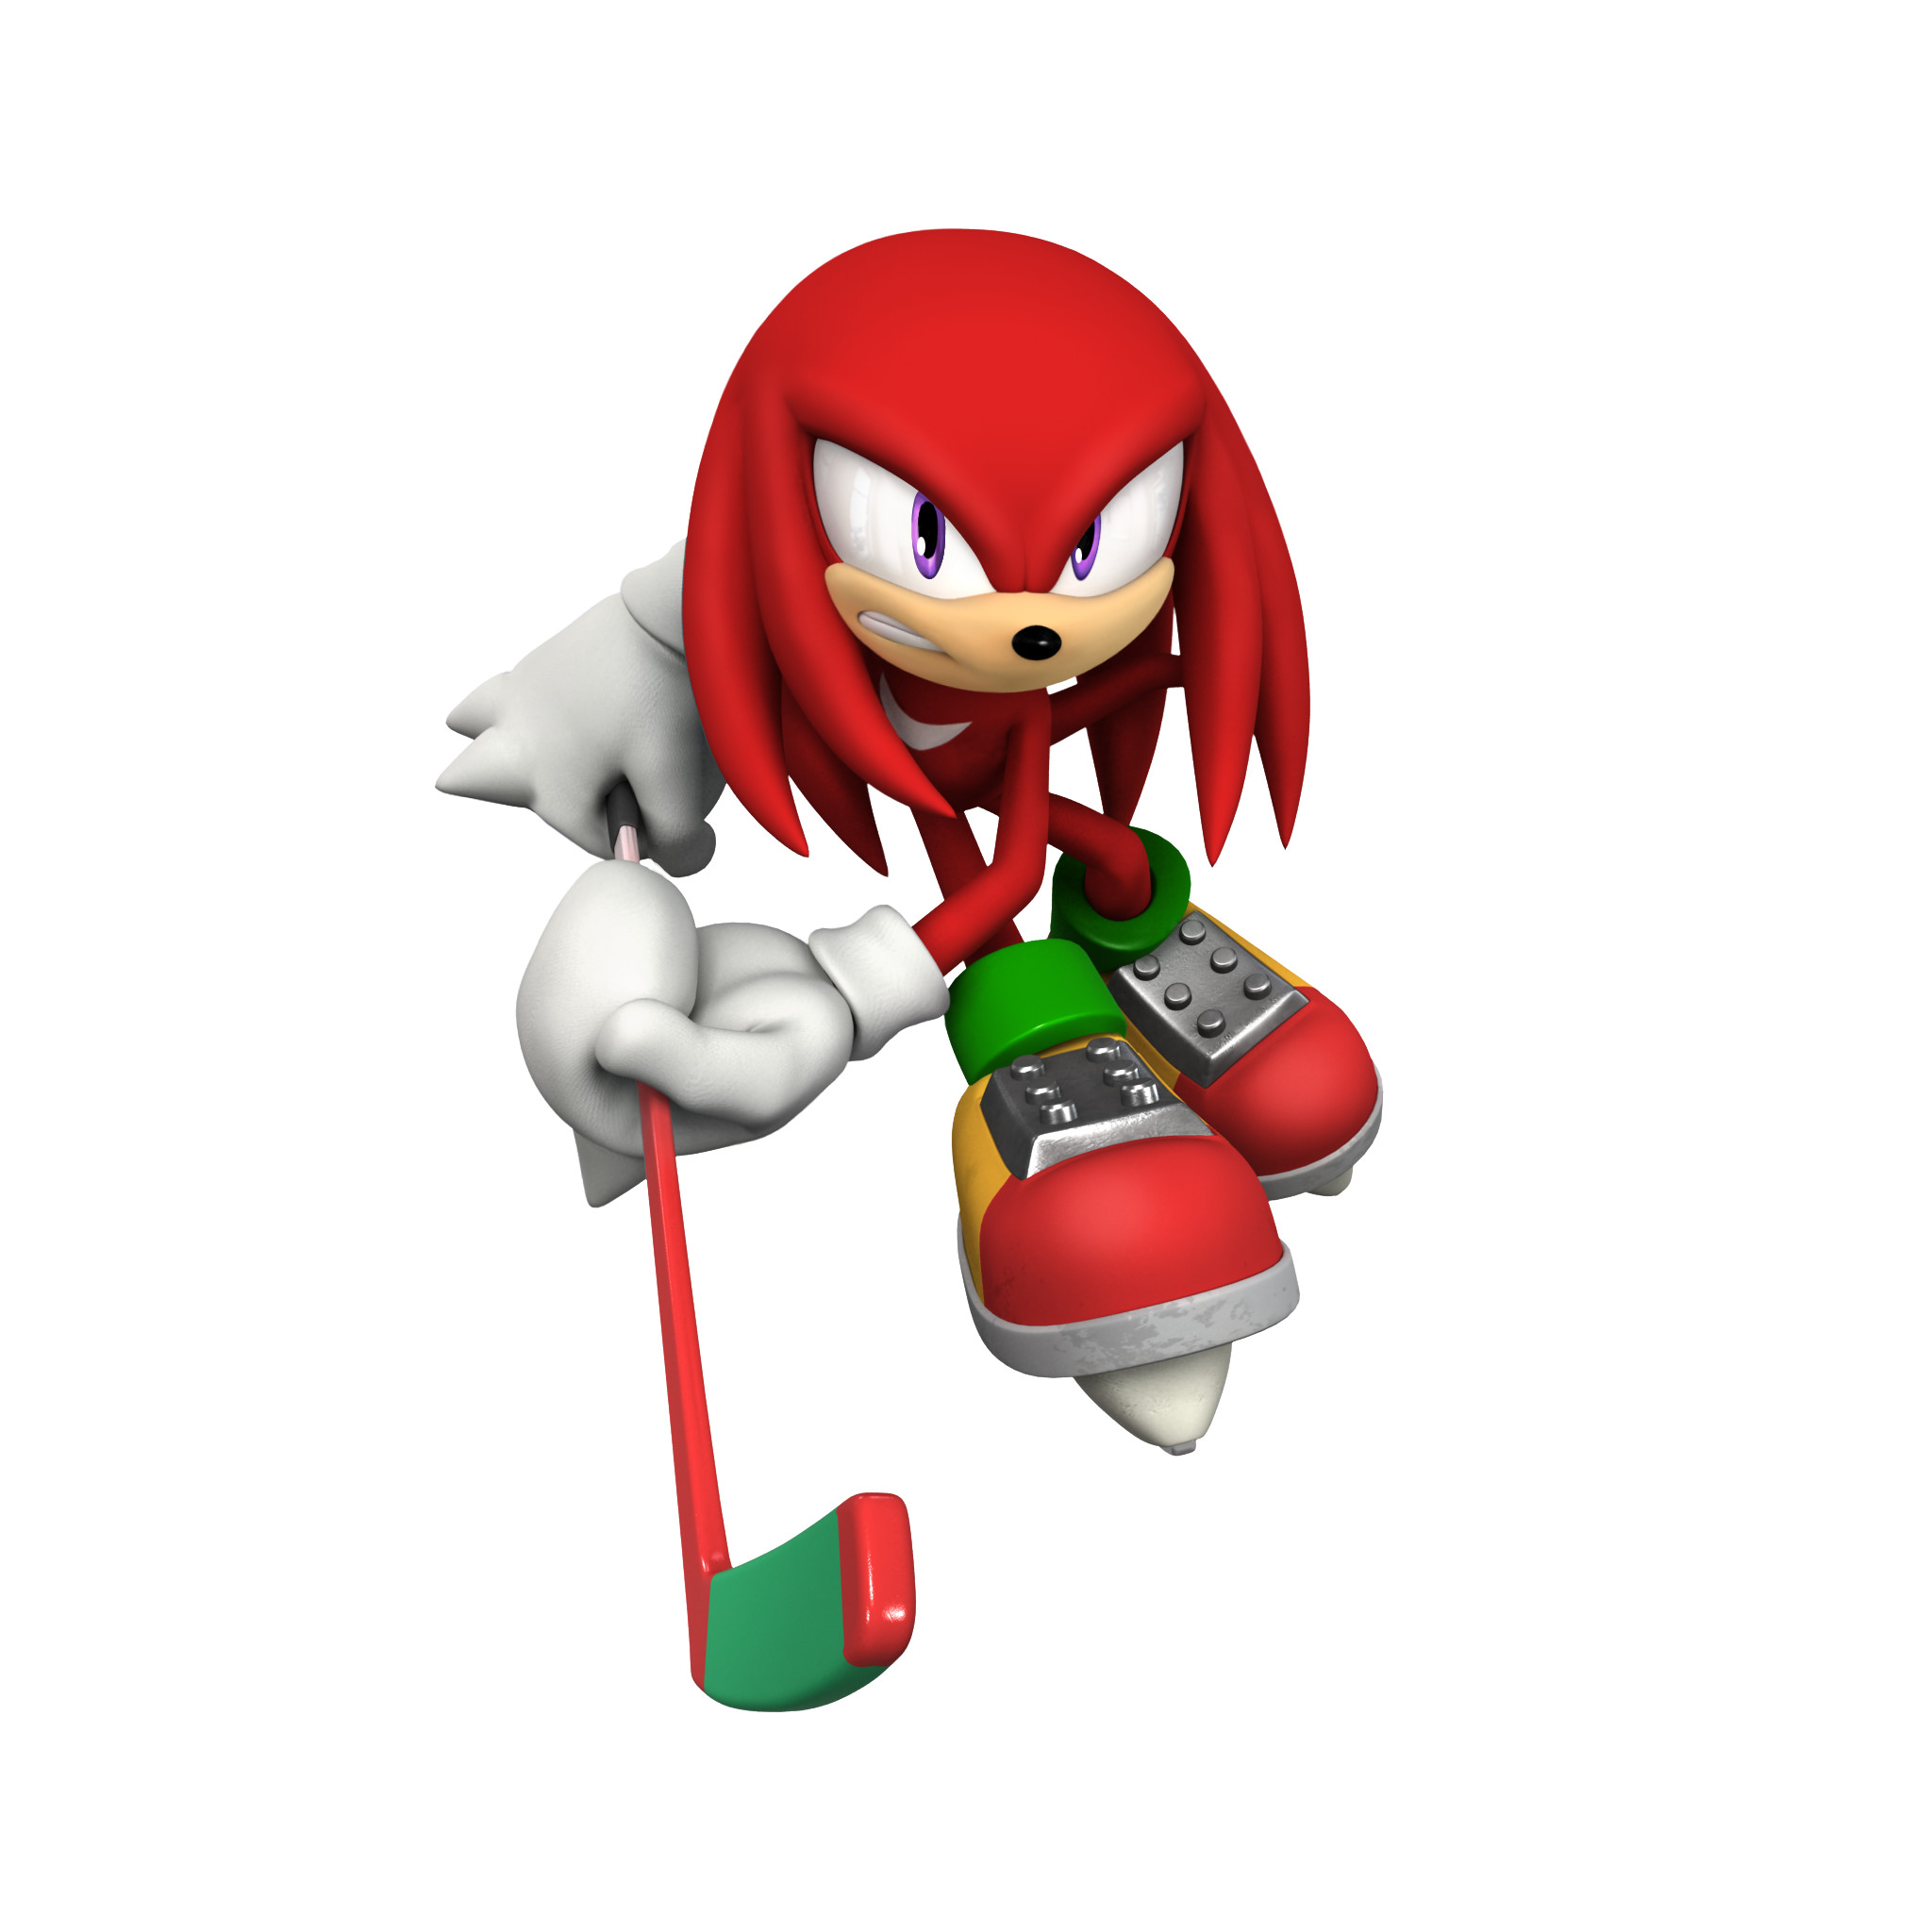 2048x2048 Mario & Sonic At The Olympic Winter Games - Knuckles The Echidna (Ice  Hockey)